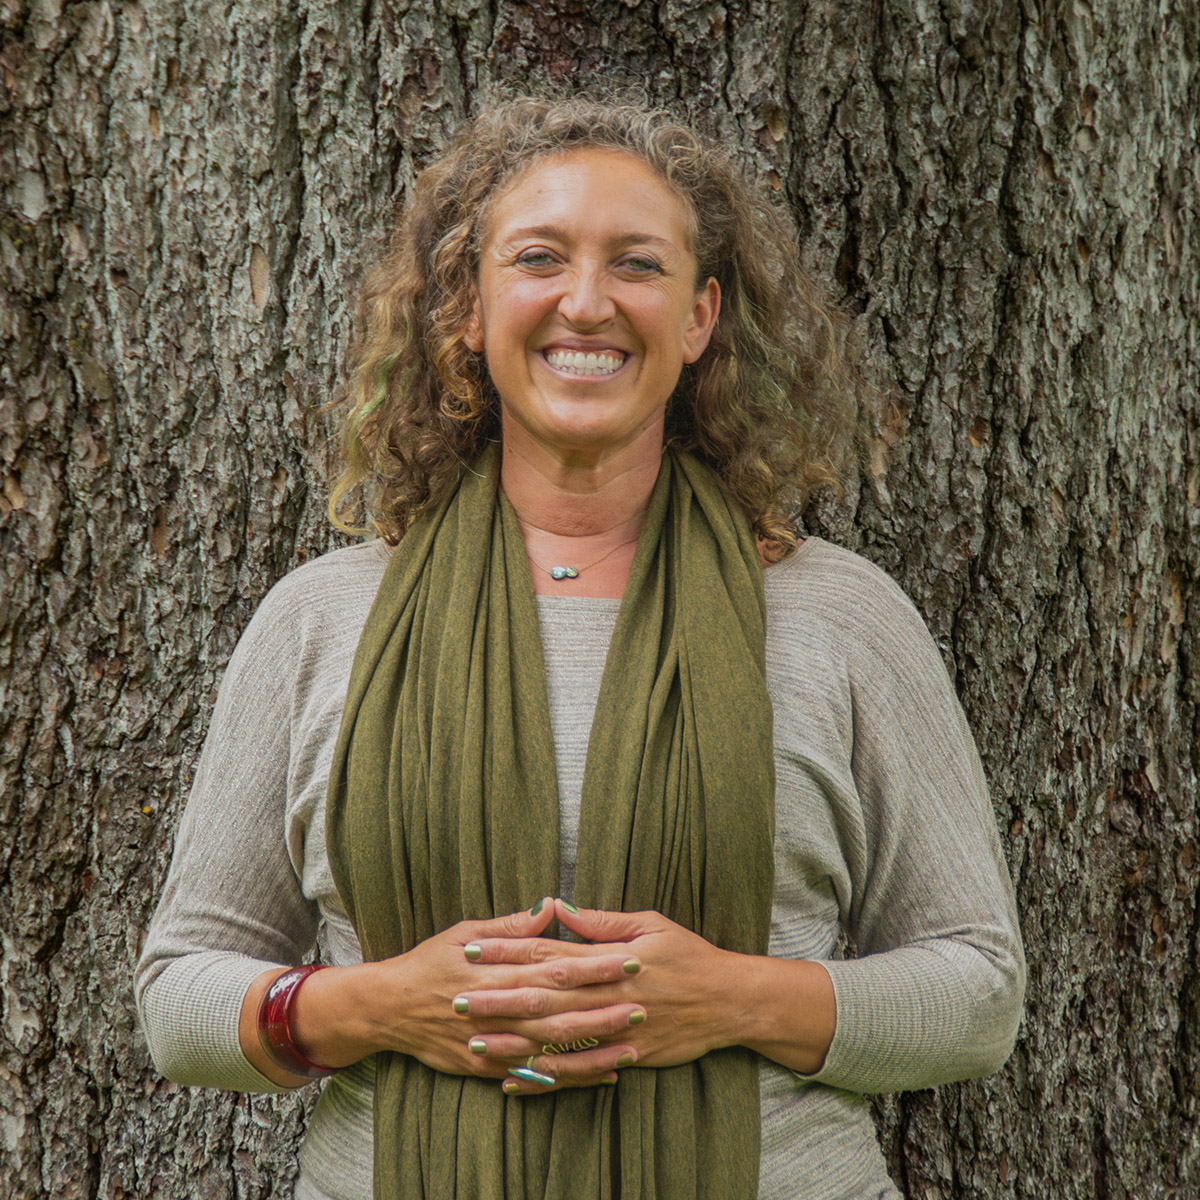 Zara Zimbardo color portrait. Zara is a woman with light colored curly hair. She is smiling, standing in front of a wide-trunk of a tree. She has her hands laced and rested on her stomach.